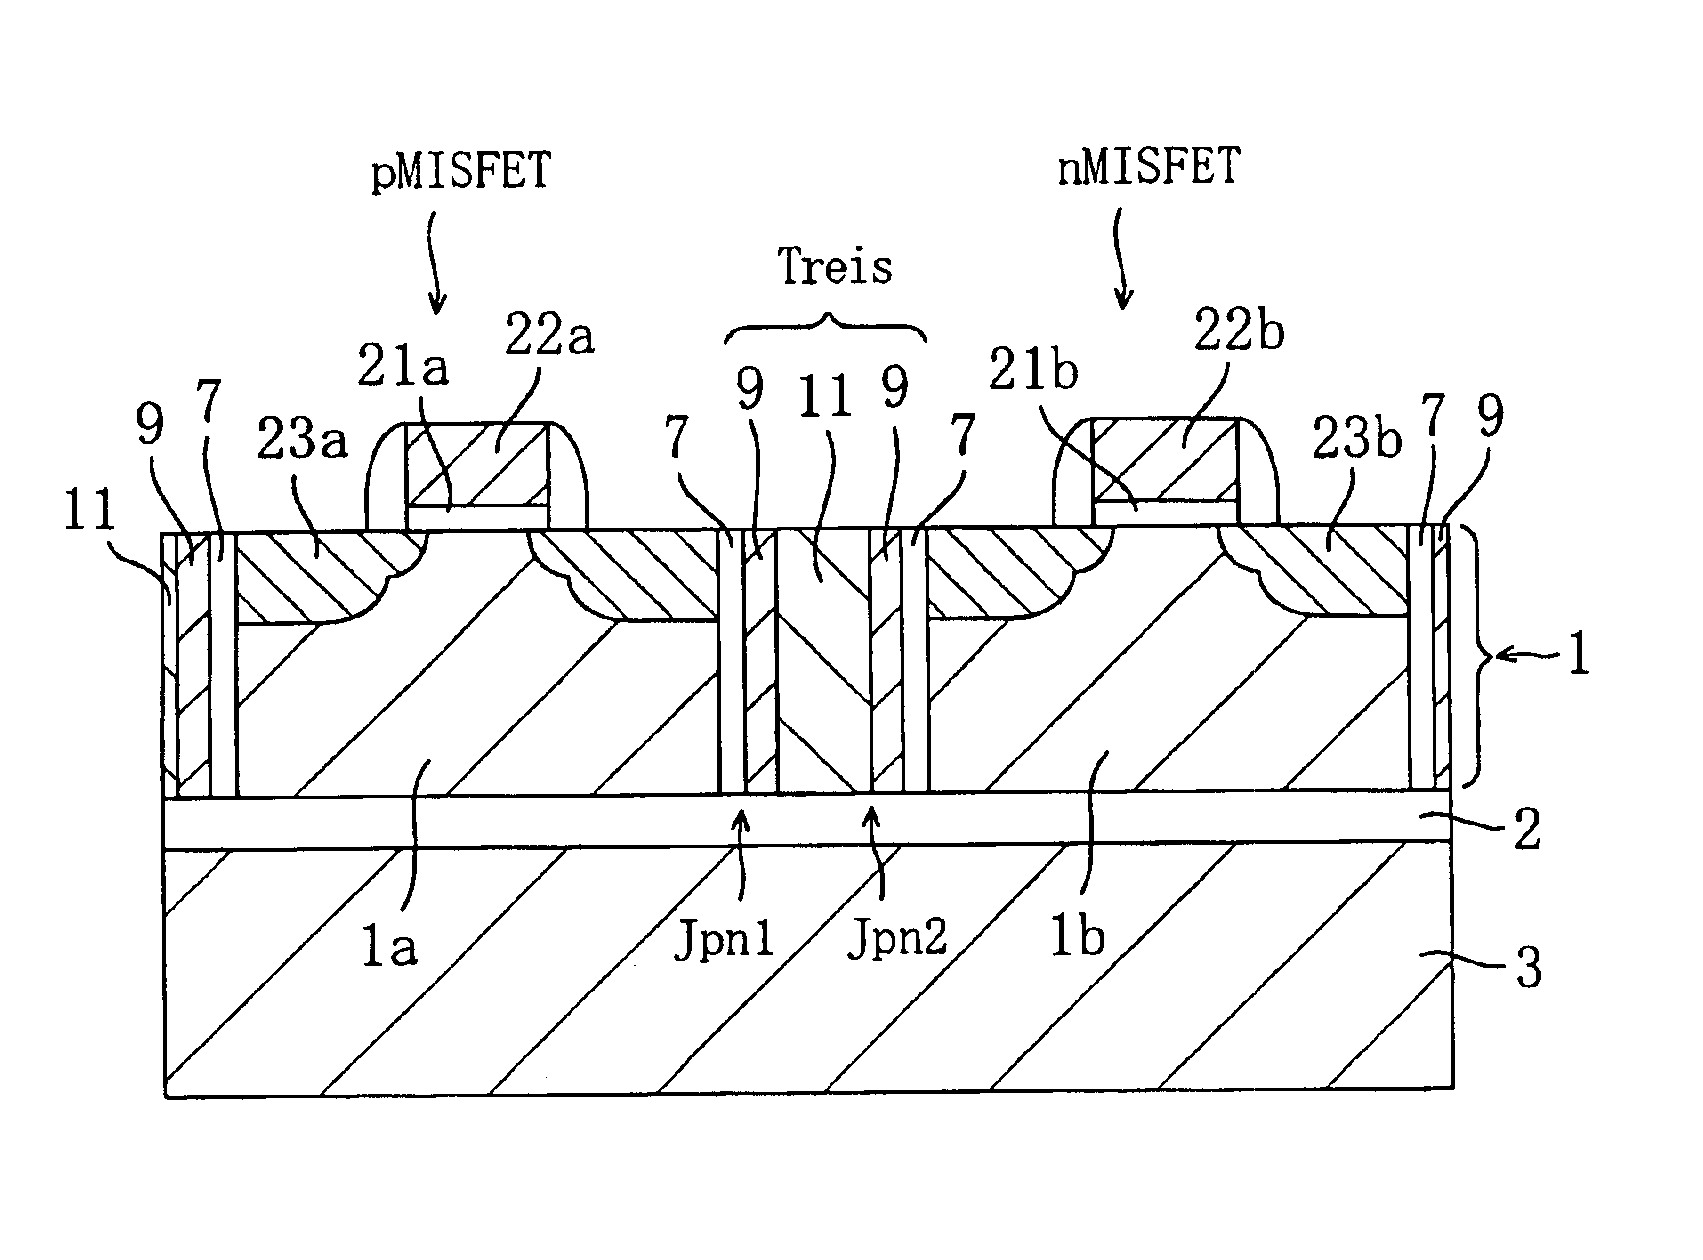 Semiconductor device using an SOI substrate and having a trench isolation and method for fabricating the same